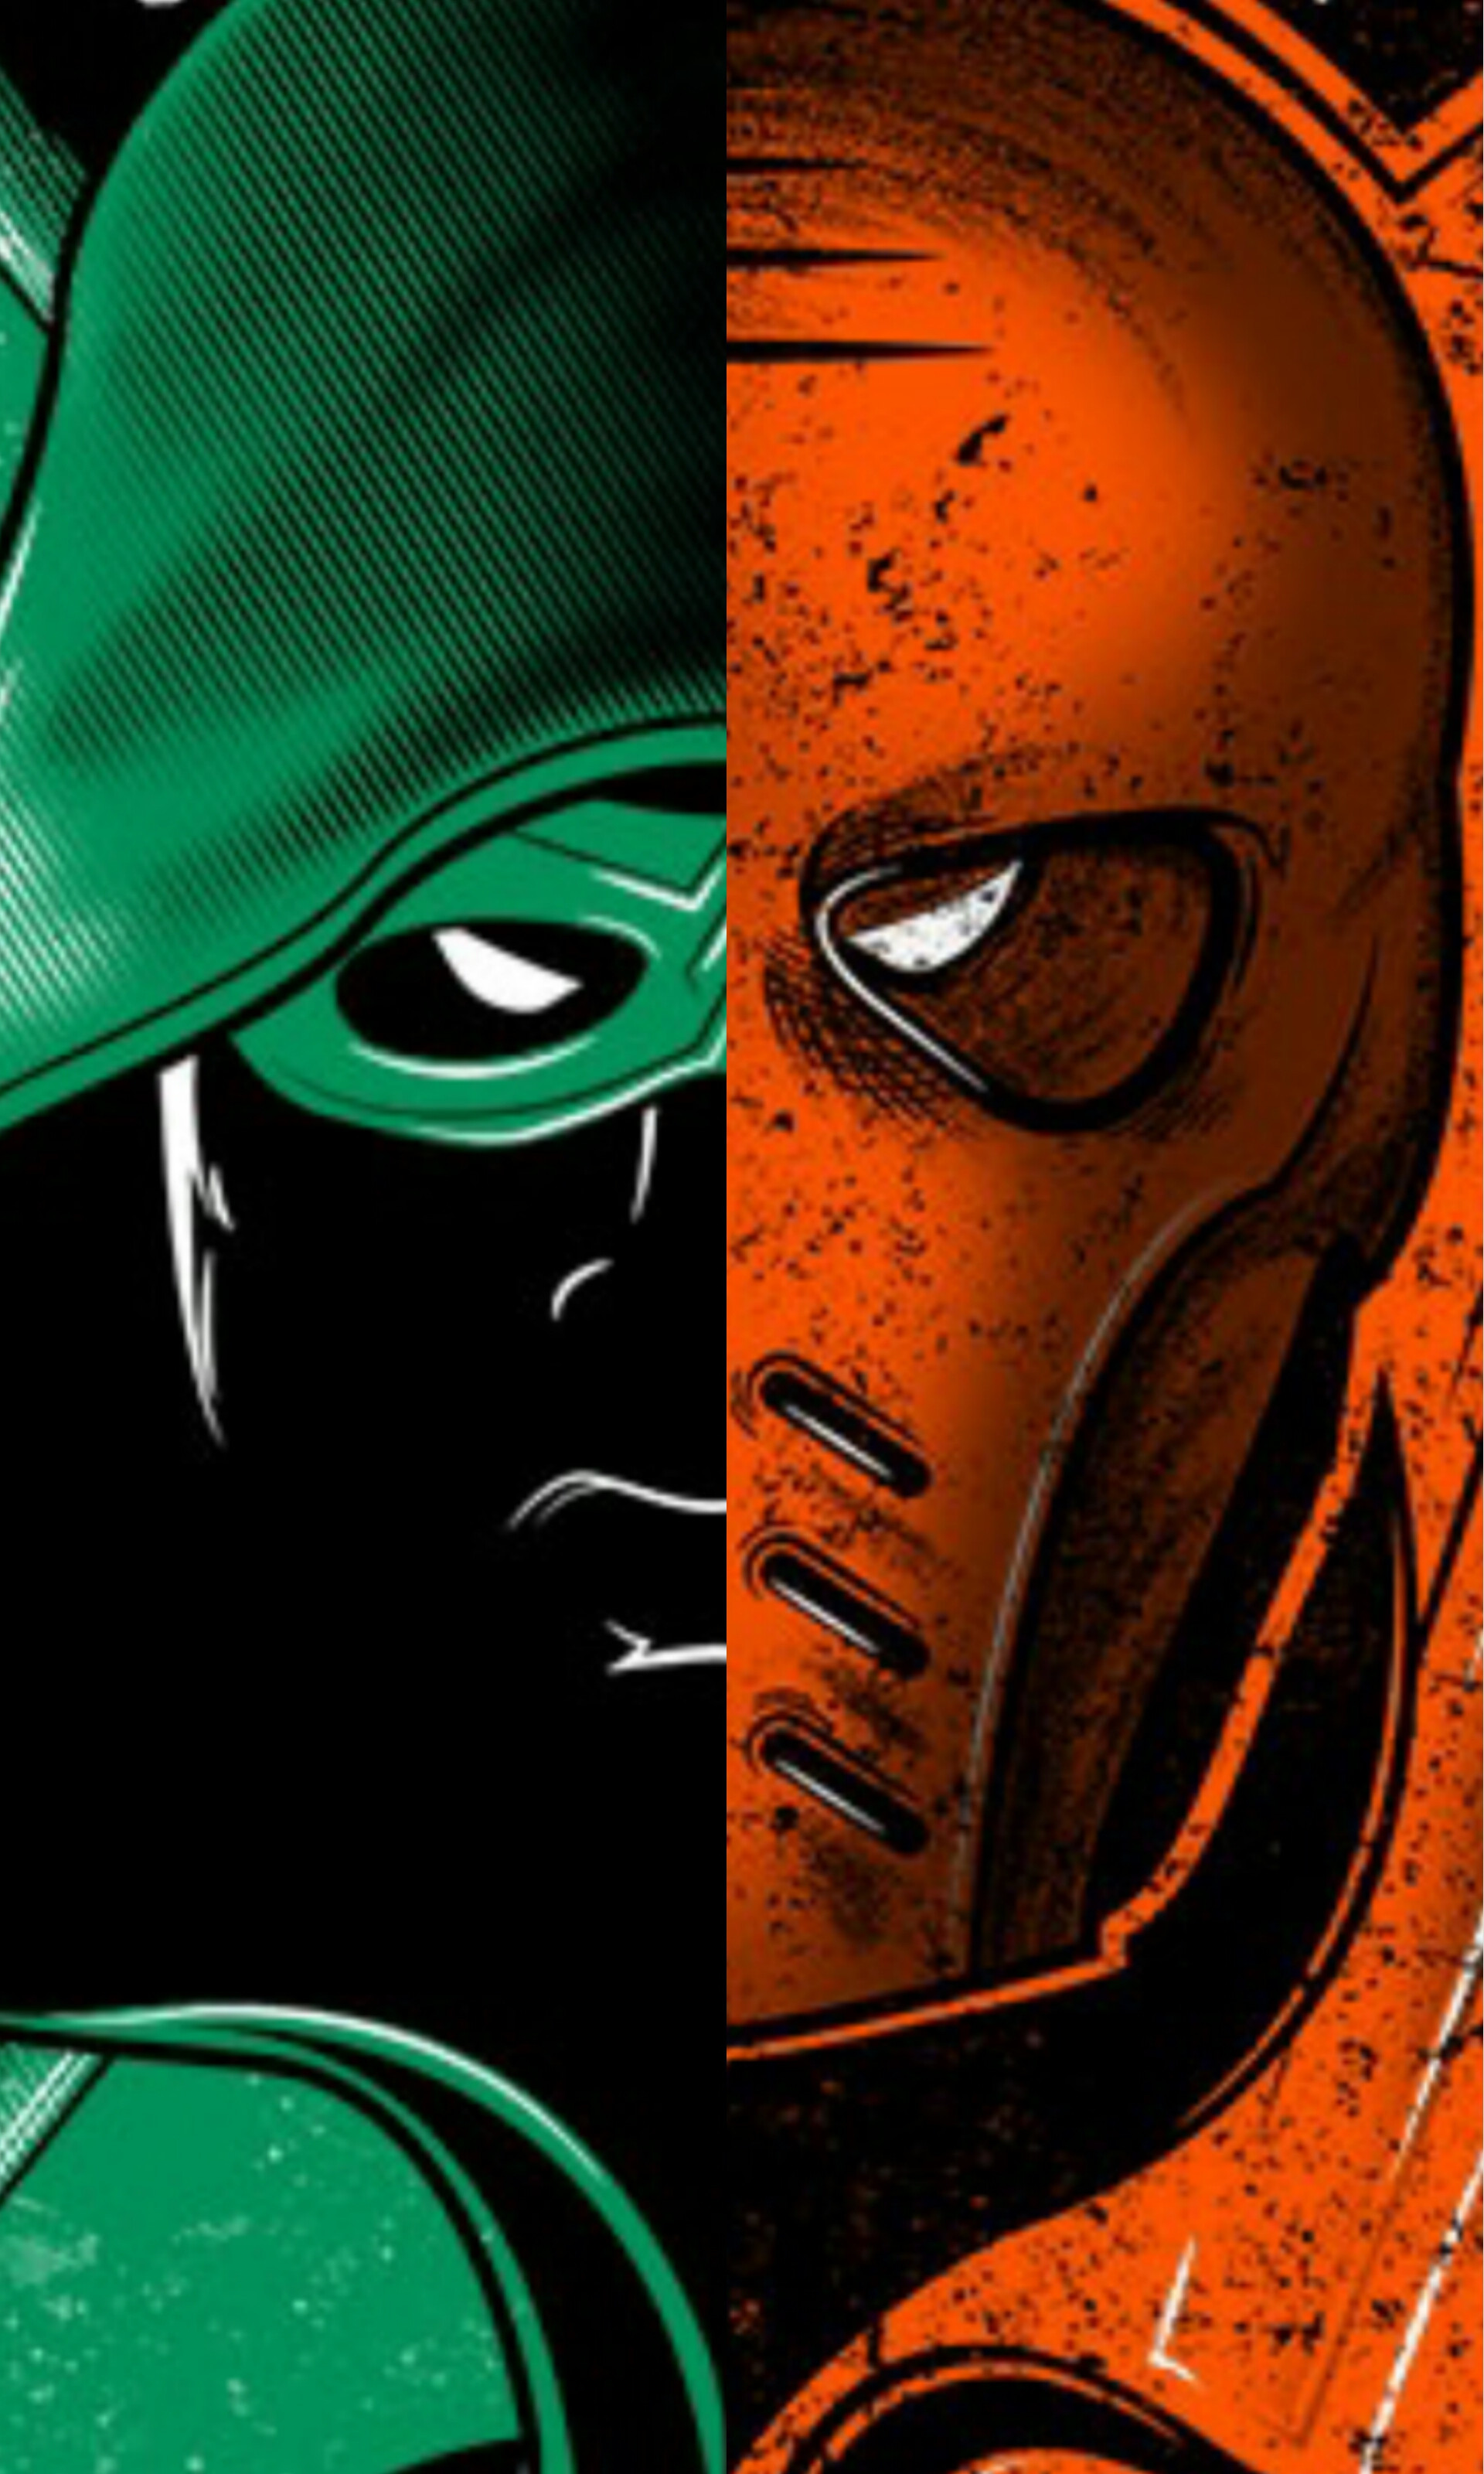 Ive been looking for a phone wallpaper that has half Green Arrow and half Deathstroke. I decided to make one out of the wallpapers posted yesterday